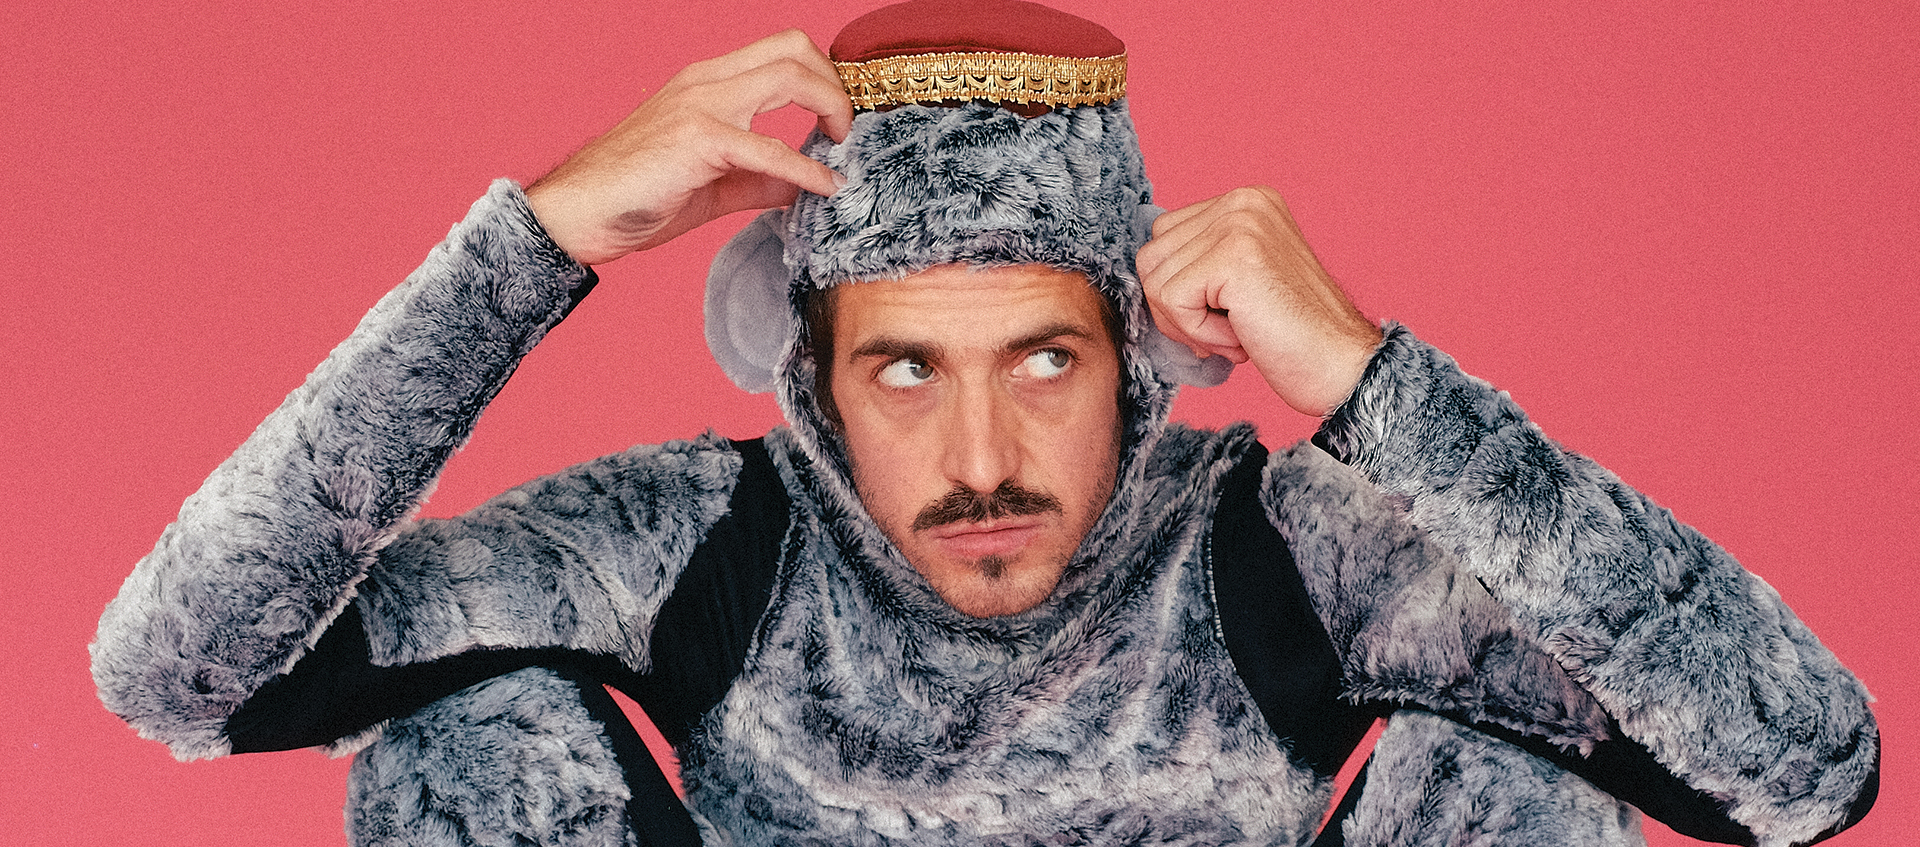 A male dancers squats in a grey fuzzy bear costume against a pink background in a promotional image for FluxFlow Dance Project's world premiere performance of Ursula at the Wexner Center for the Arts